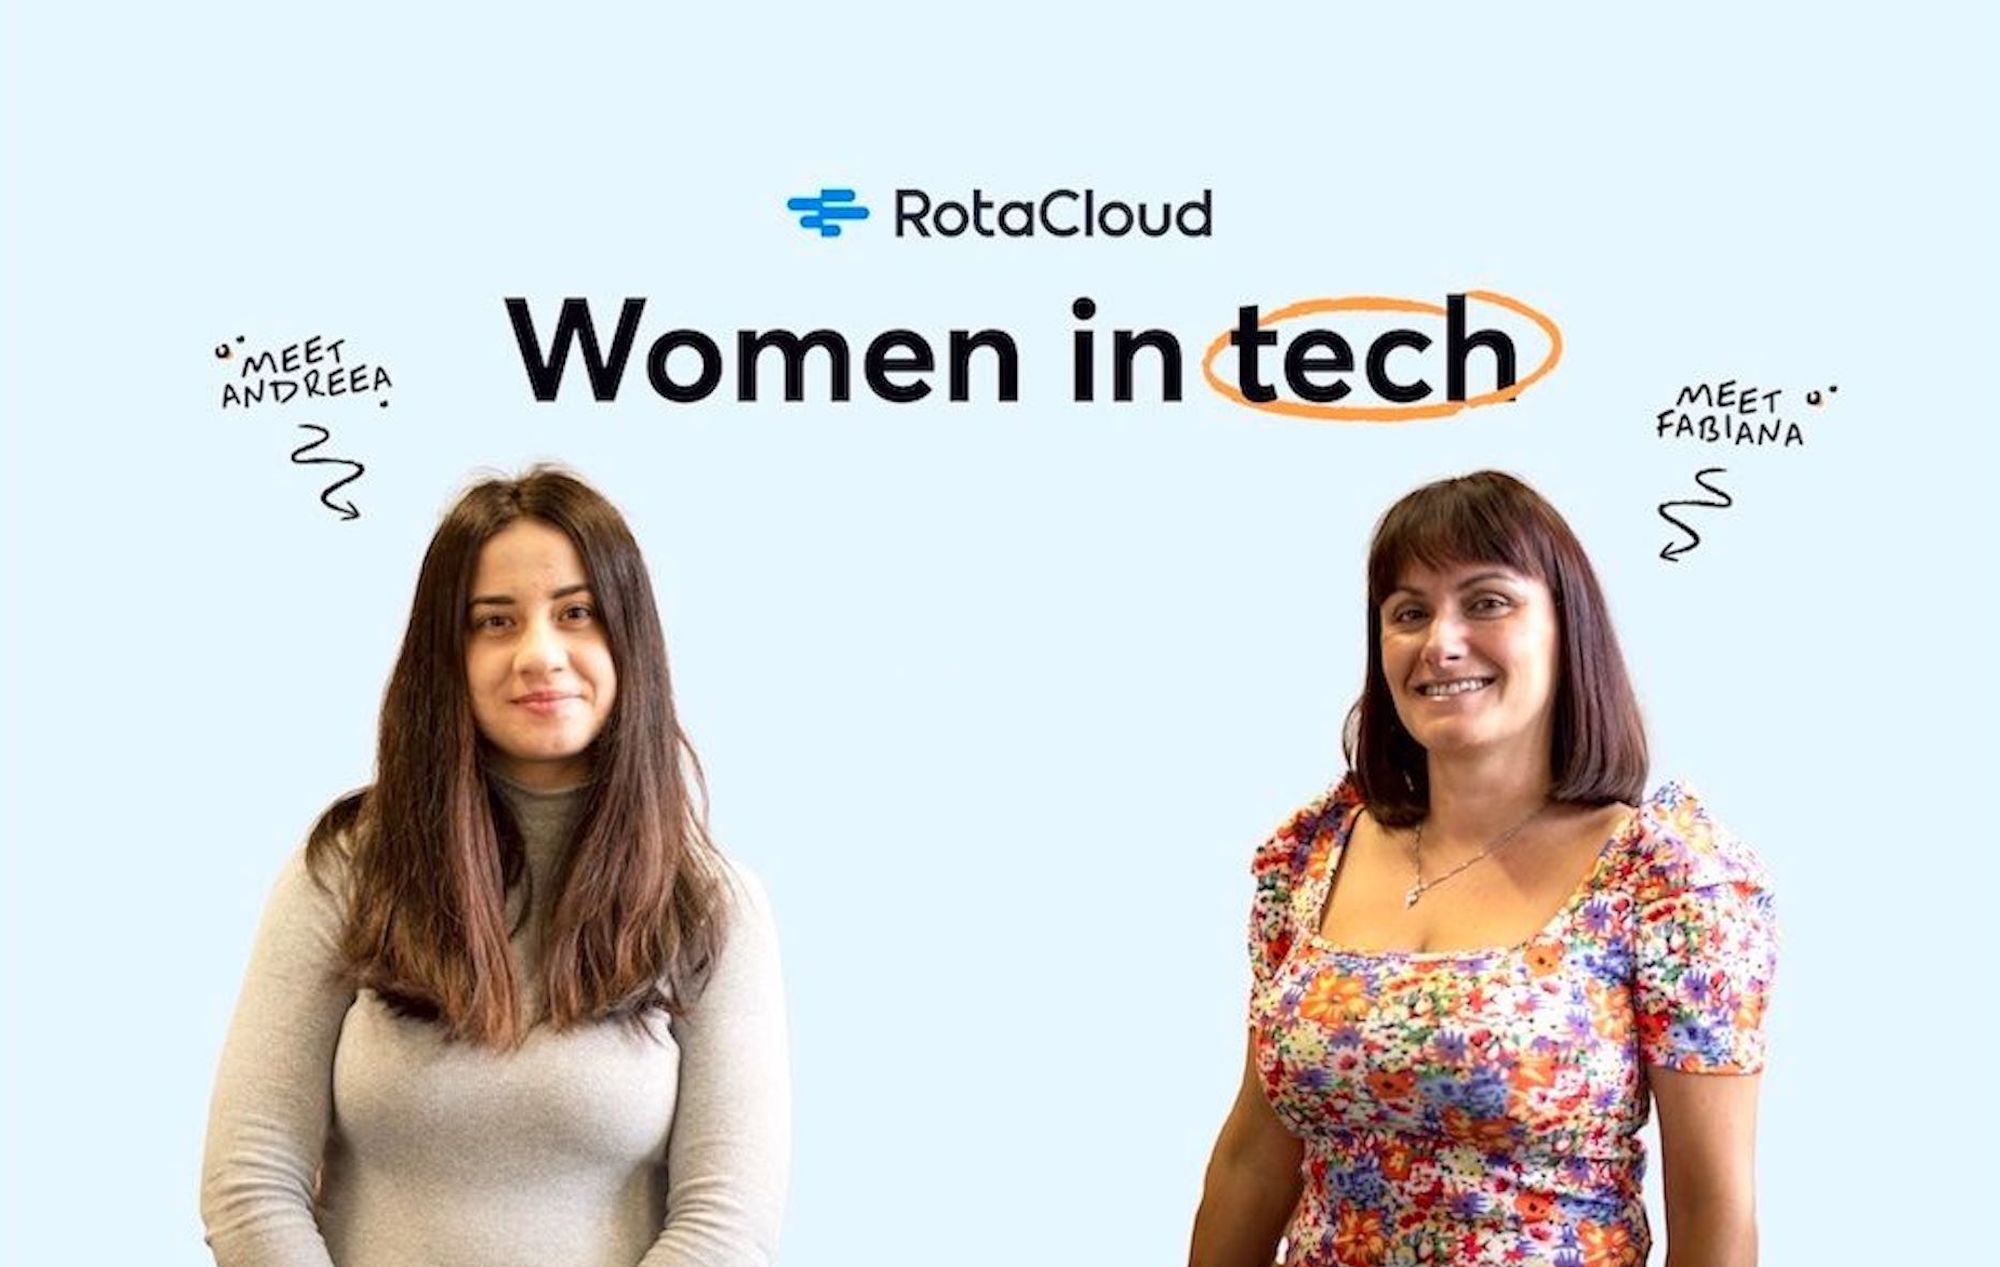 Branded image of Andreea on the left and Fabiana on the right, who both work in tech roles at RotaCloud